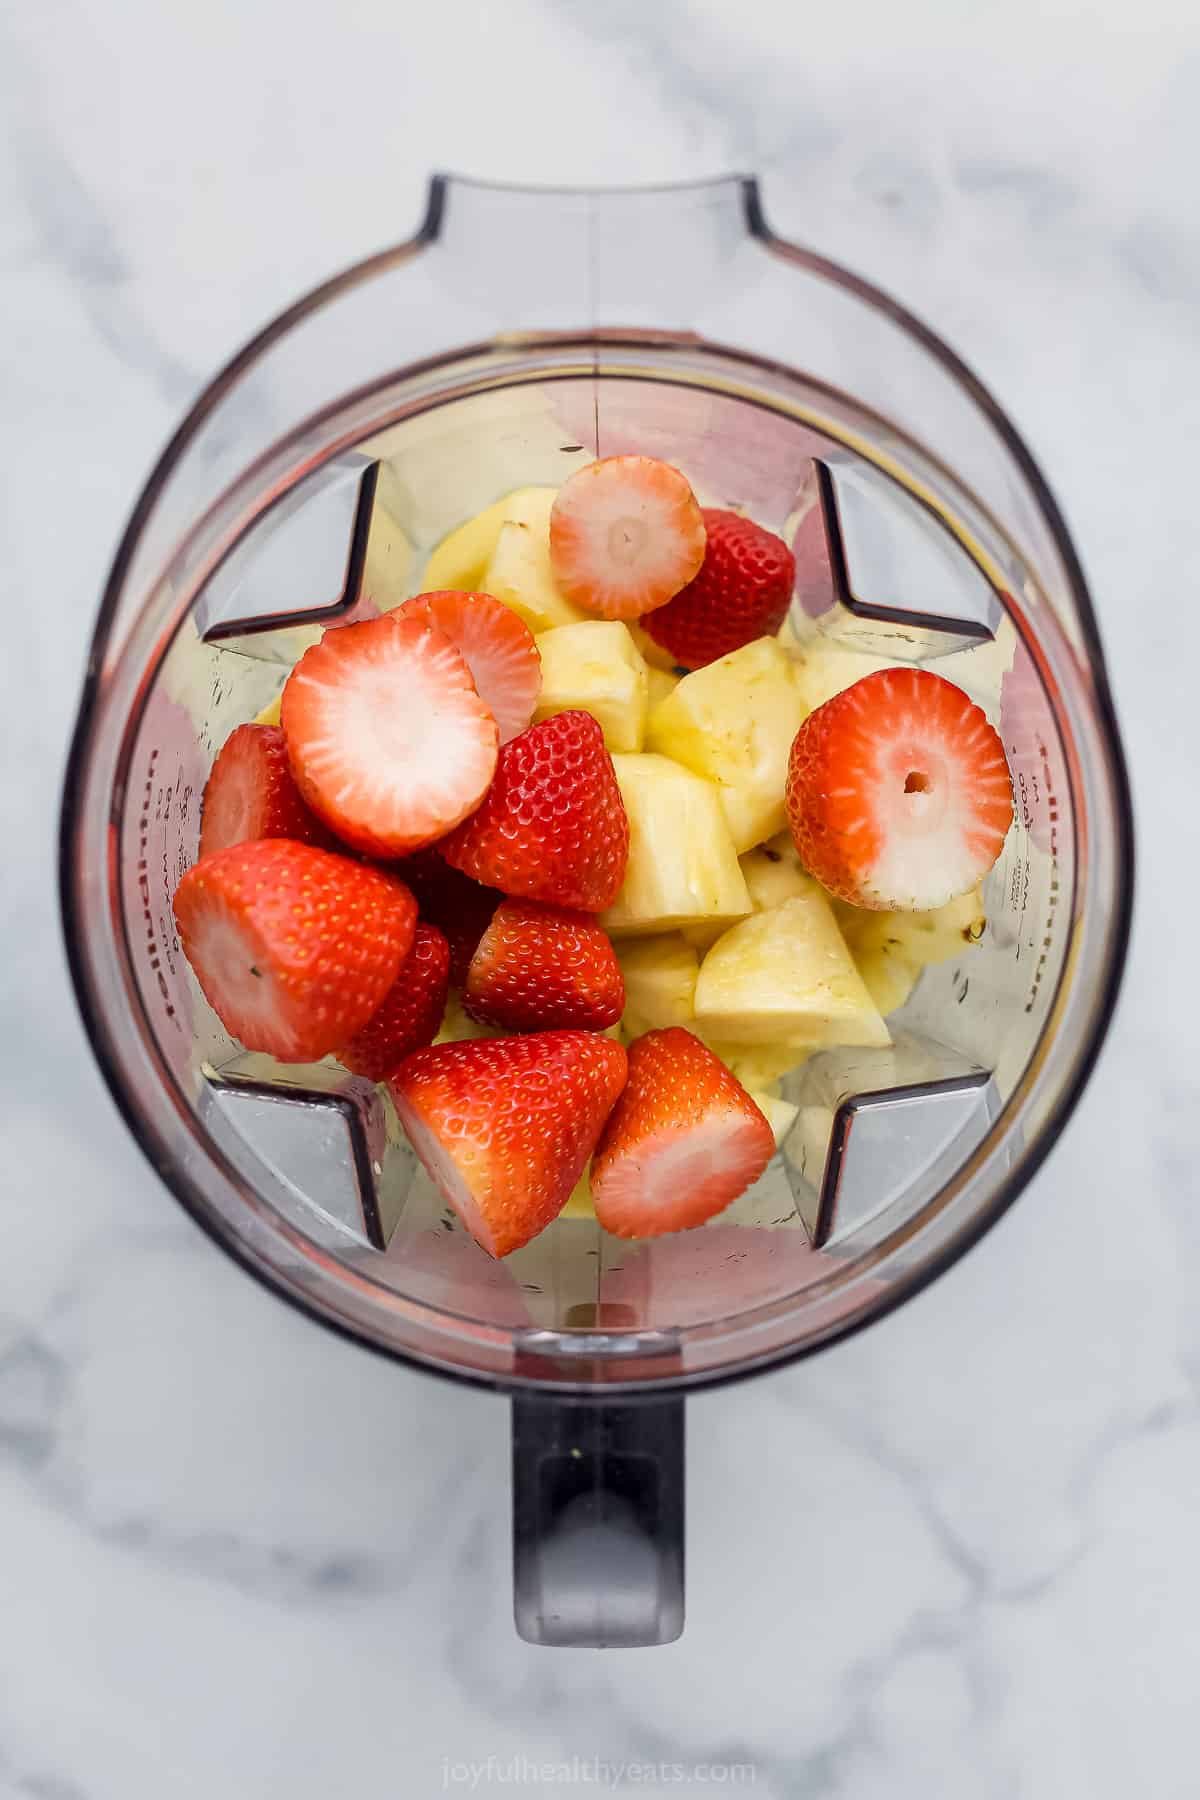 Chunks of strawberry and pineapple in a blender